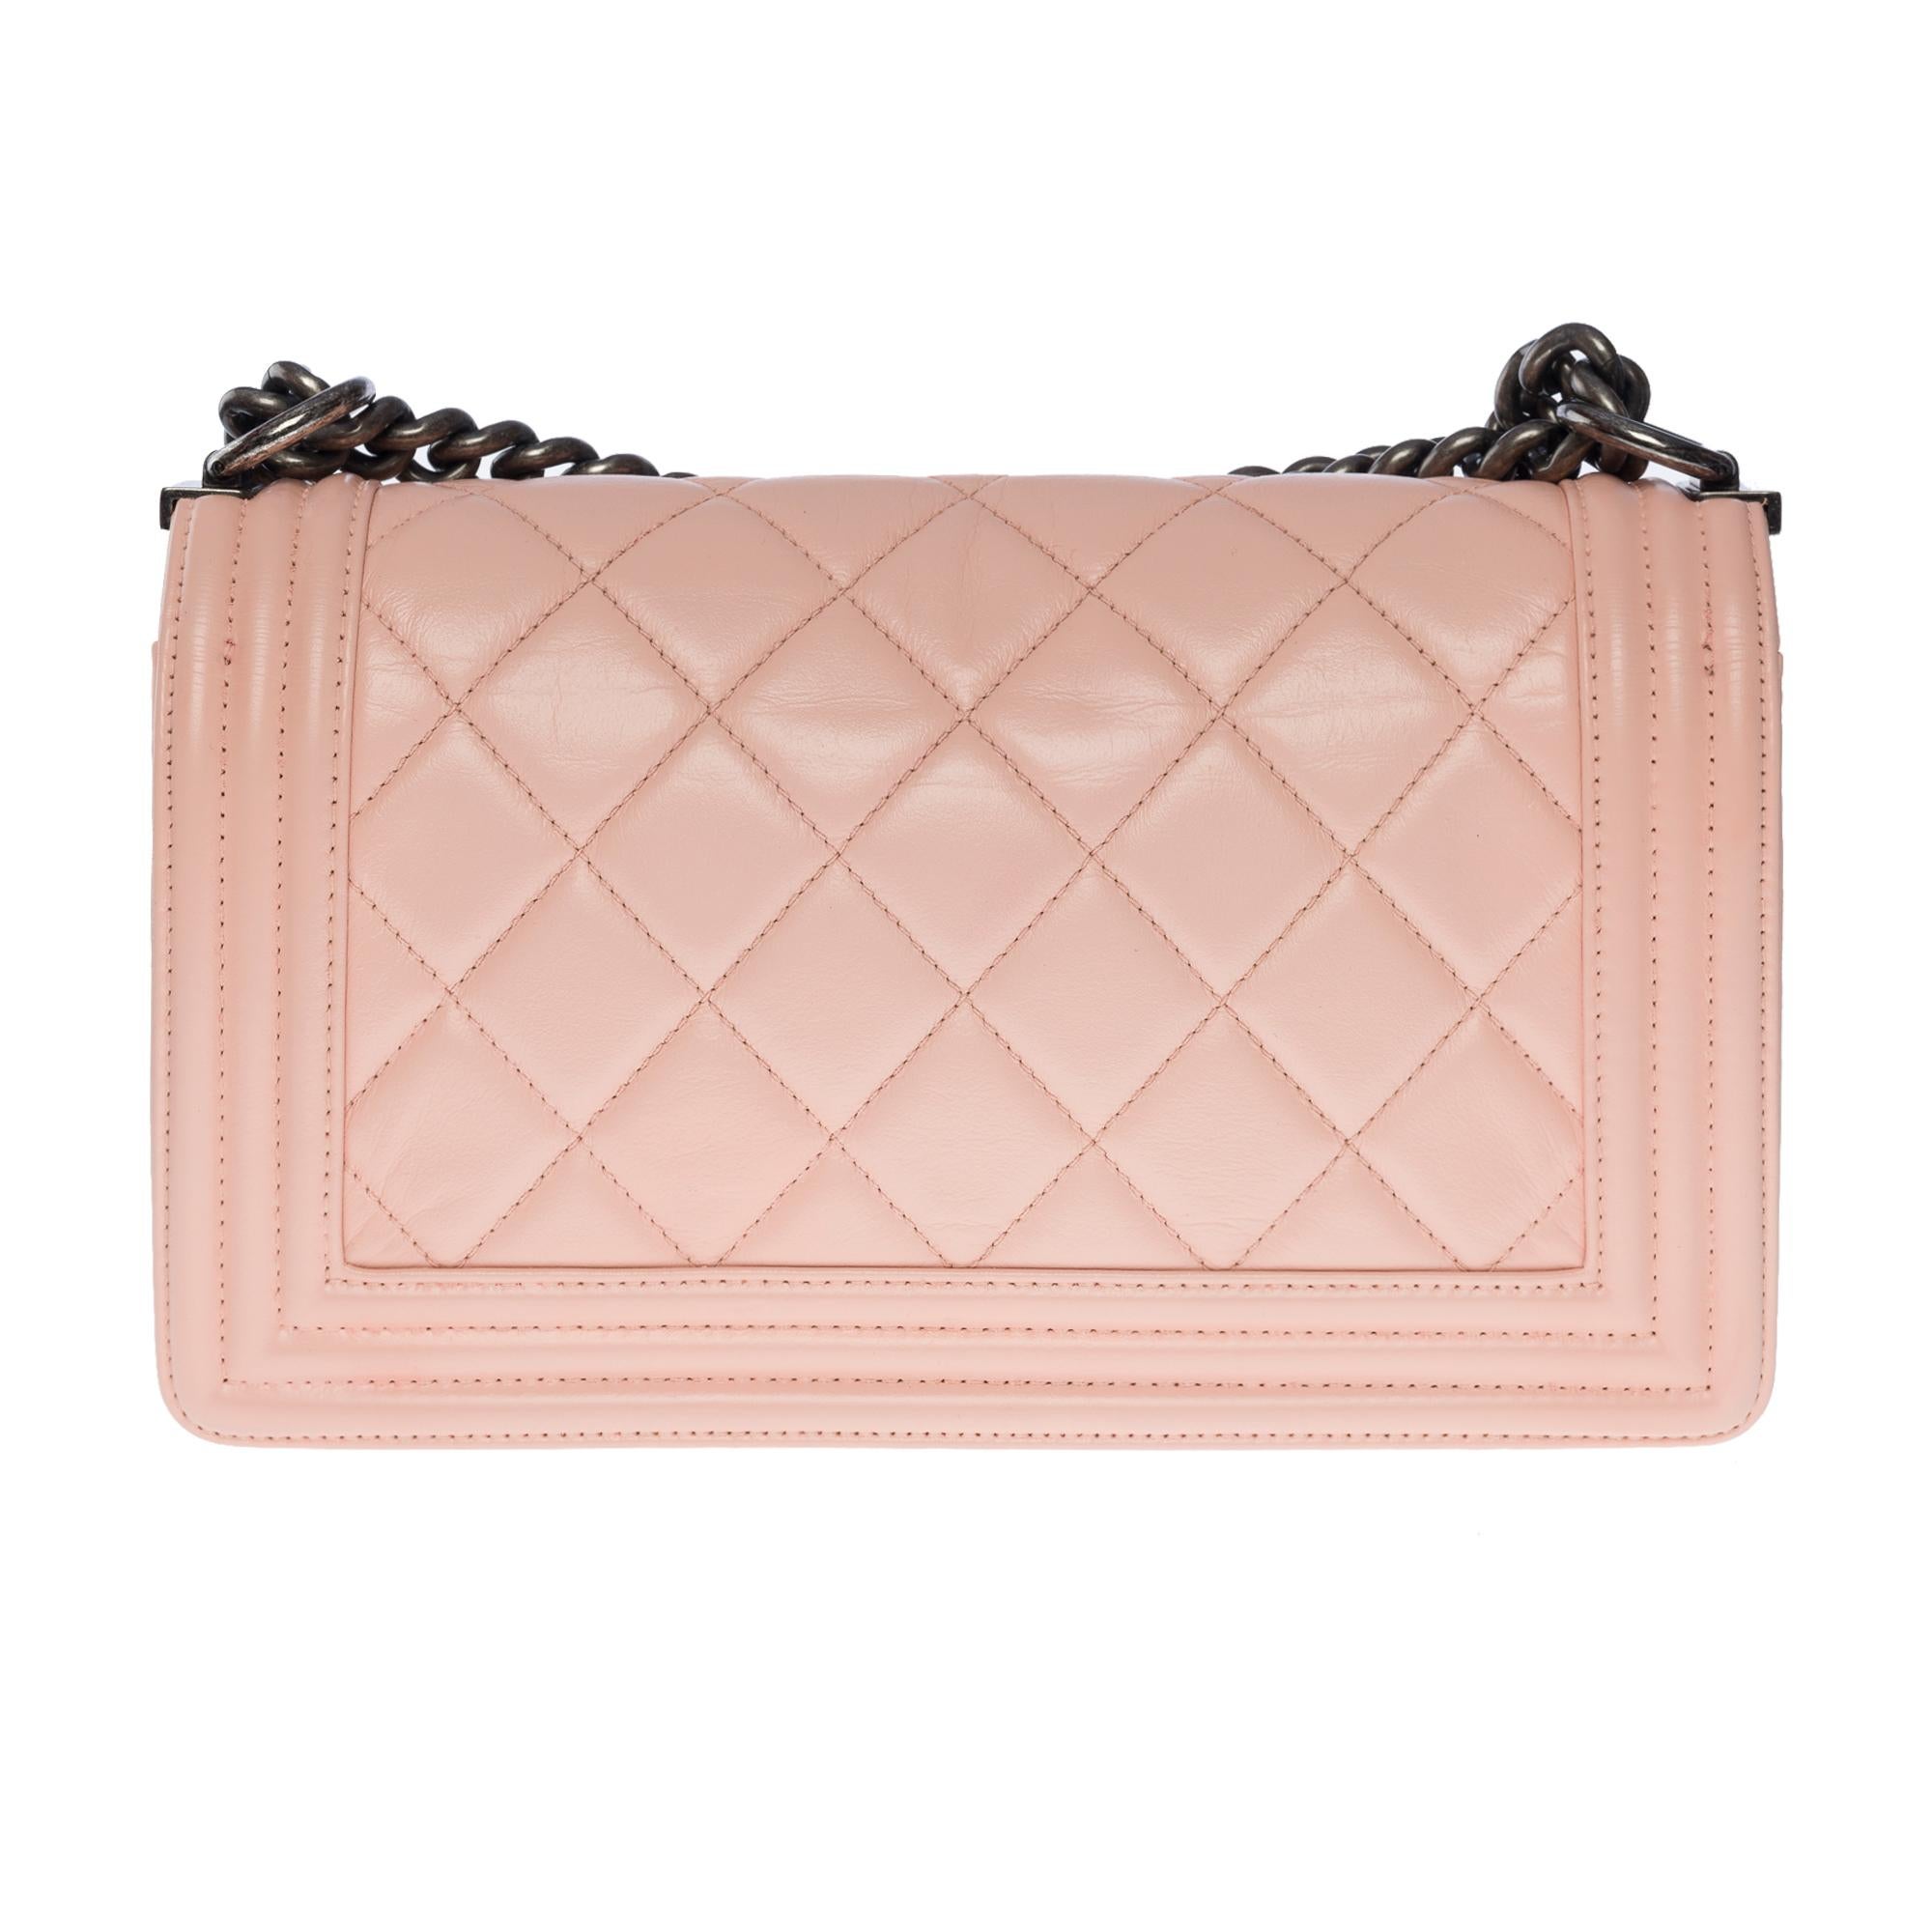 The iconic Chanel Boy old medium shoulder bag in pink quilted leather, with ruthenium metal hardware, an adjustable ruthenium metal chain handle for shoulder or crossbody support

A ruthenium metal closure on flap
Inner lining in pink canvas, one